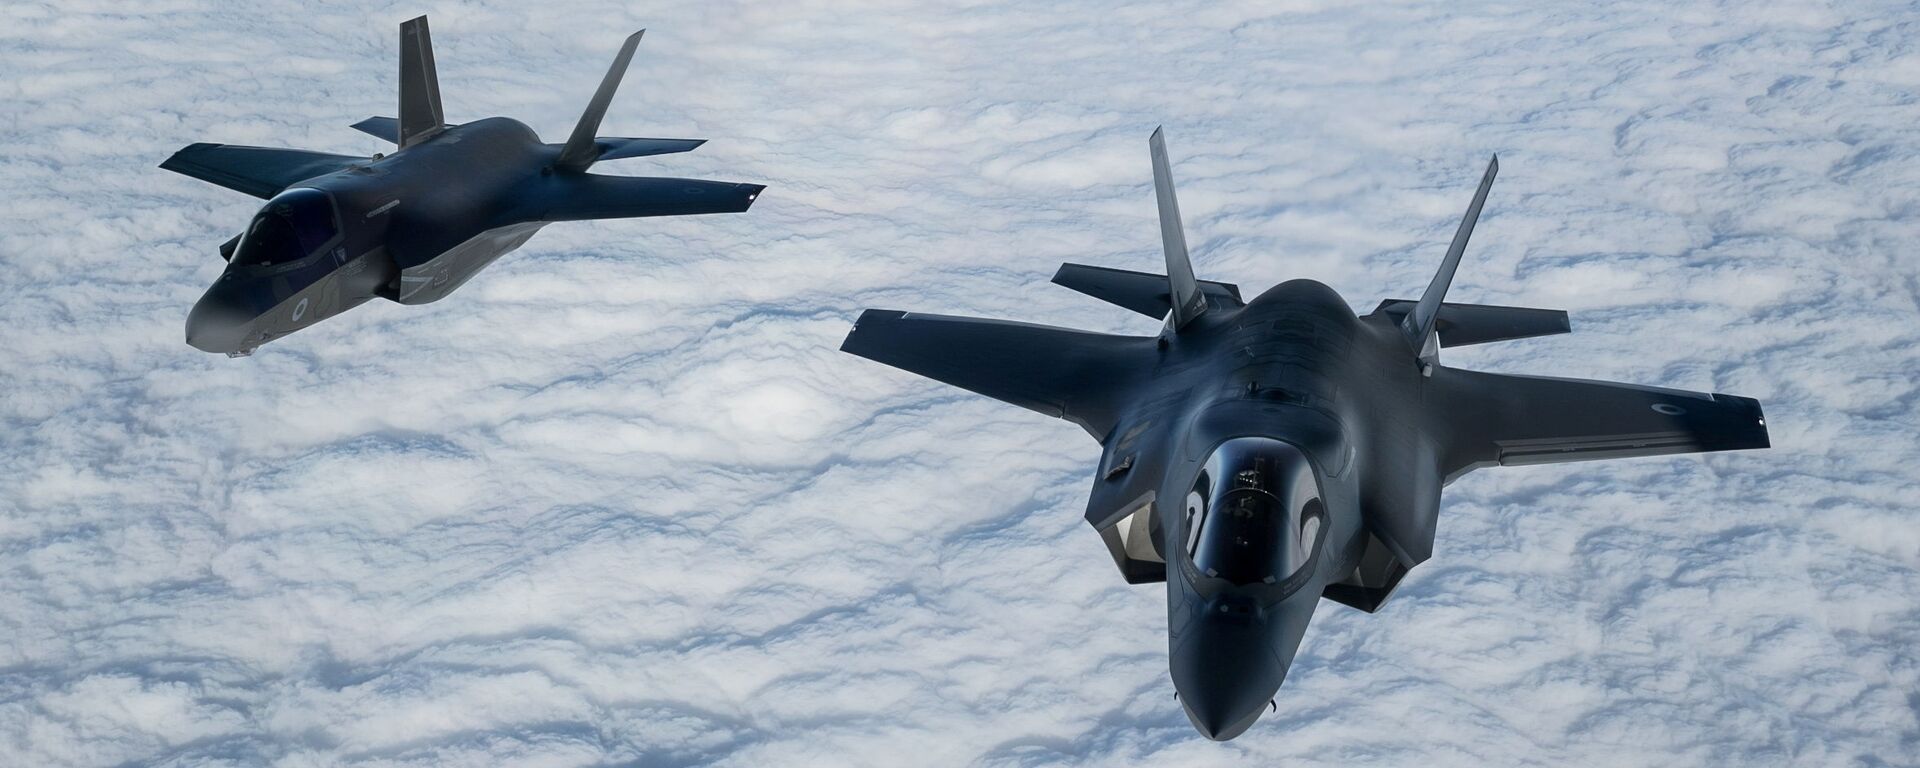 A pair of RAF F-35B Lightning fighter jets flies over The English Channel during the Point Blank exercise after taking off from RAF Mildenhall, Britain, November 27, 2018 - Sputnik International, 1920, 07.12.2021